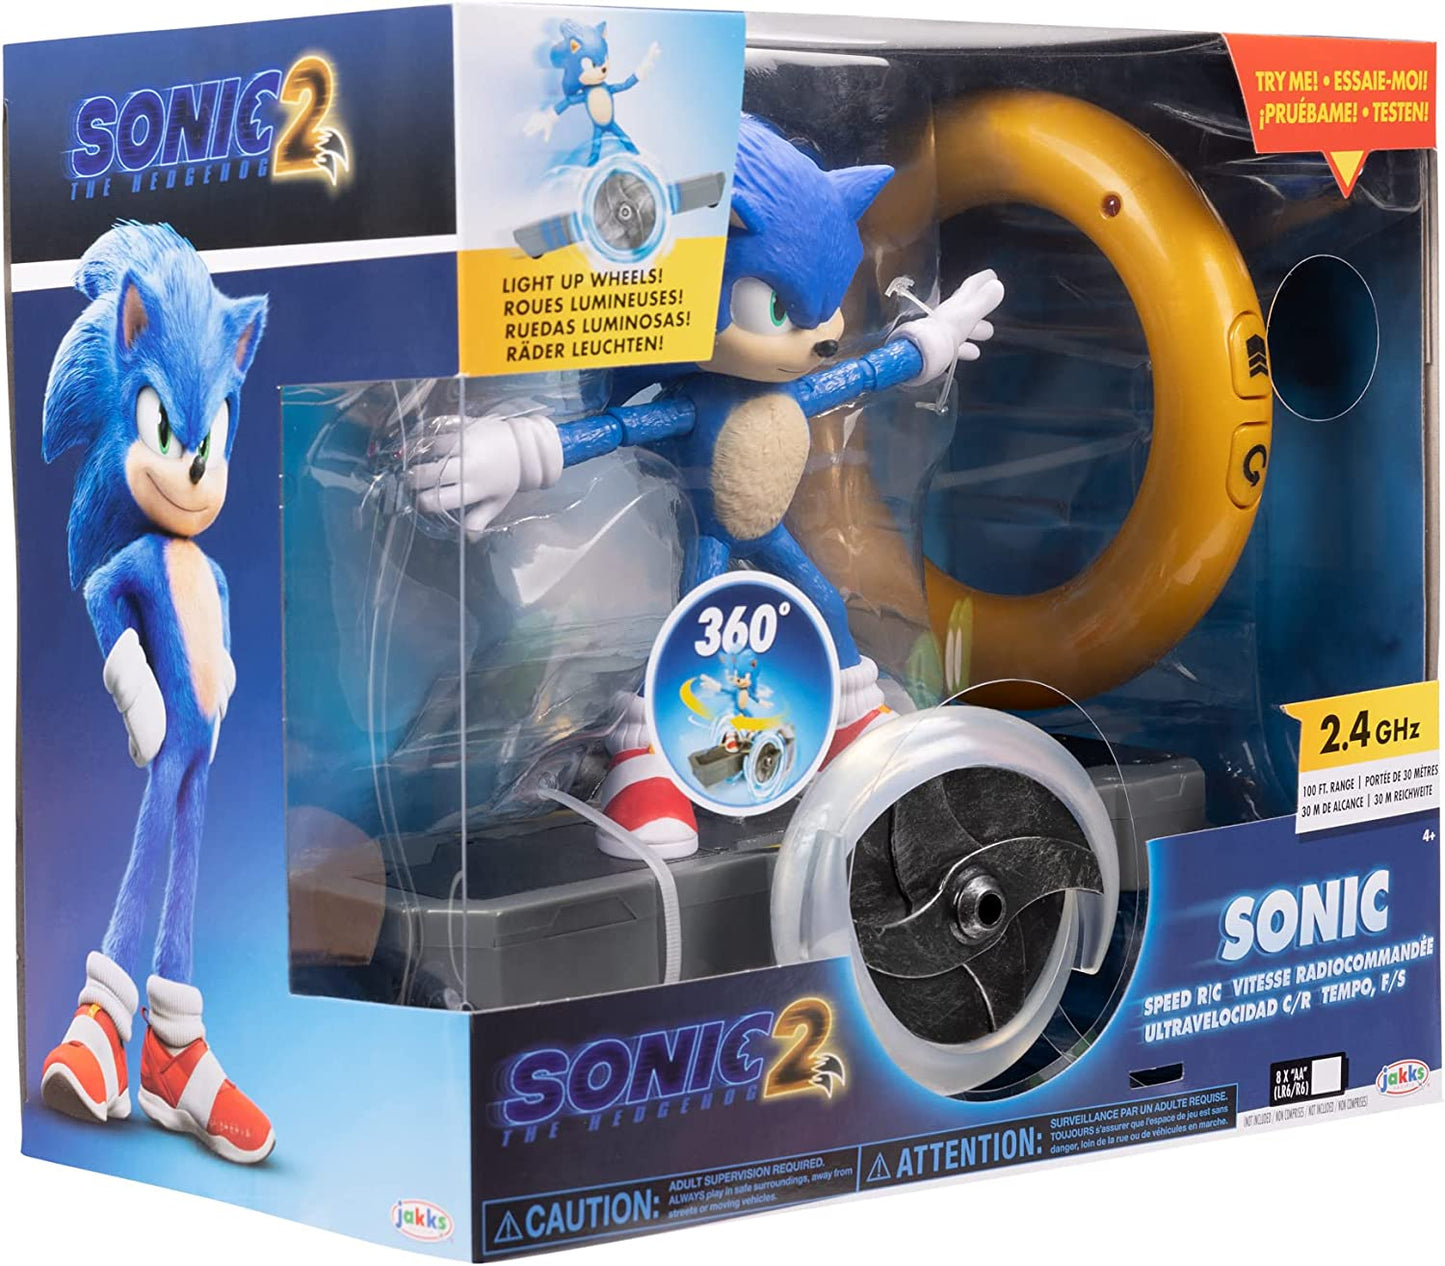 Sonic the Hedgehog Sonic 2 Movie Remote Control Car - Sonic Speed RC Vehicle